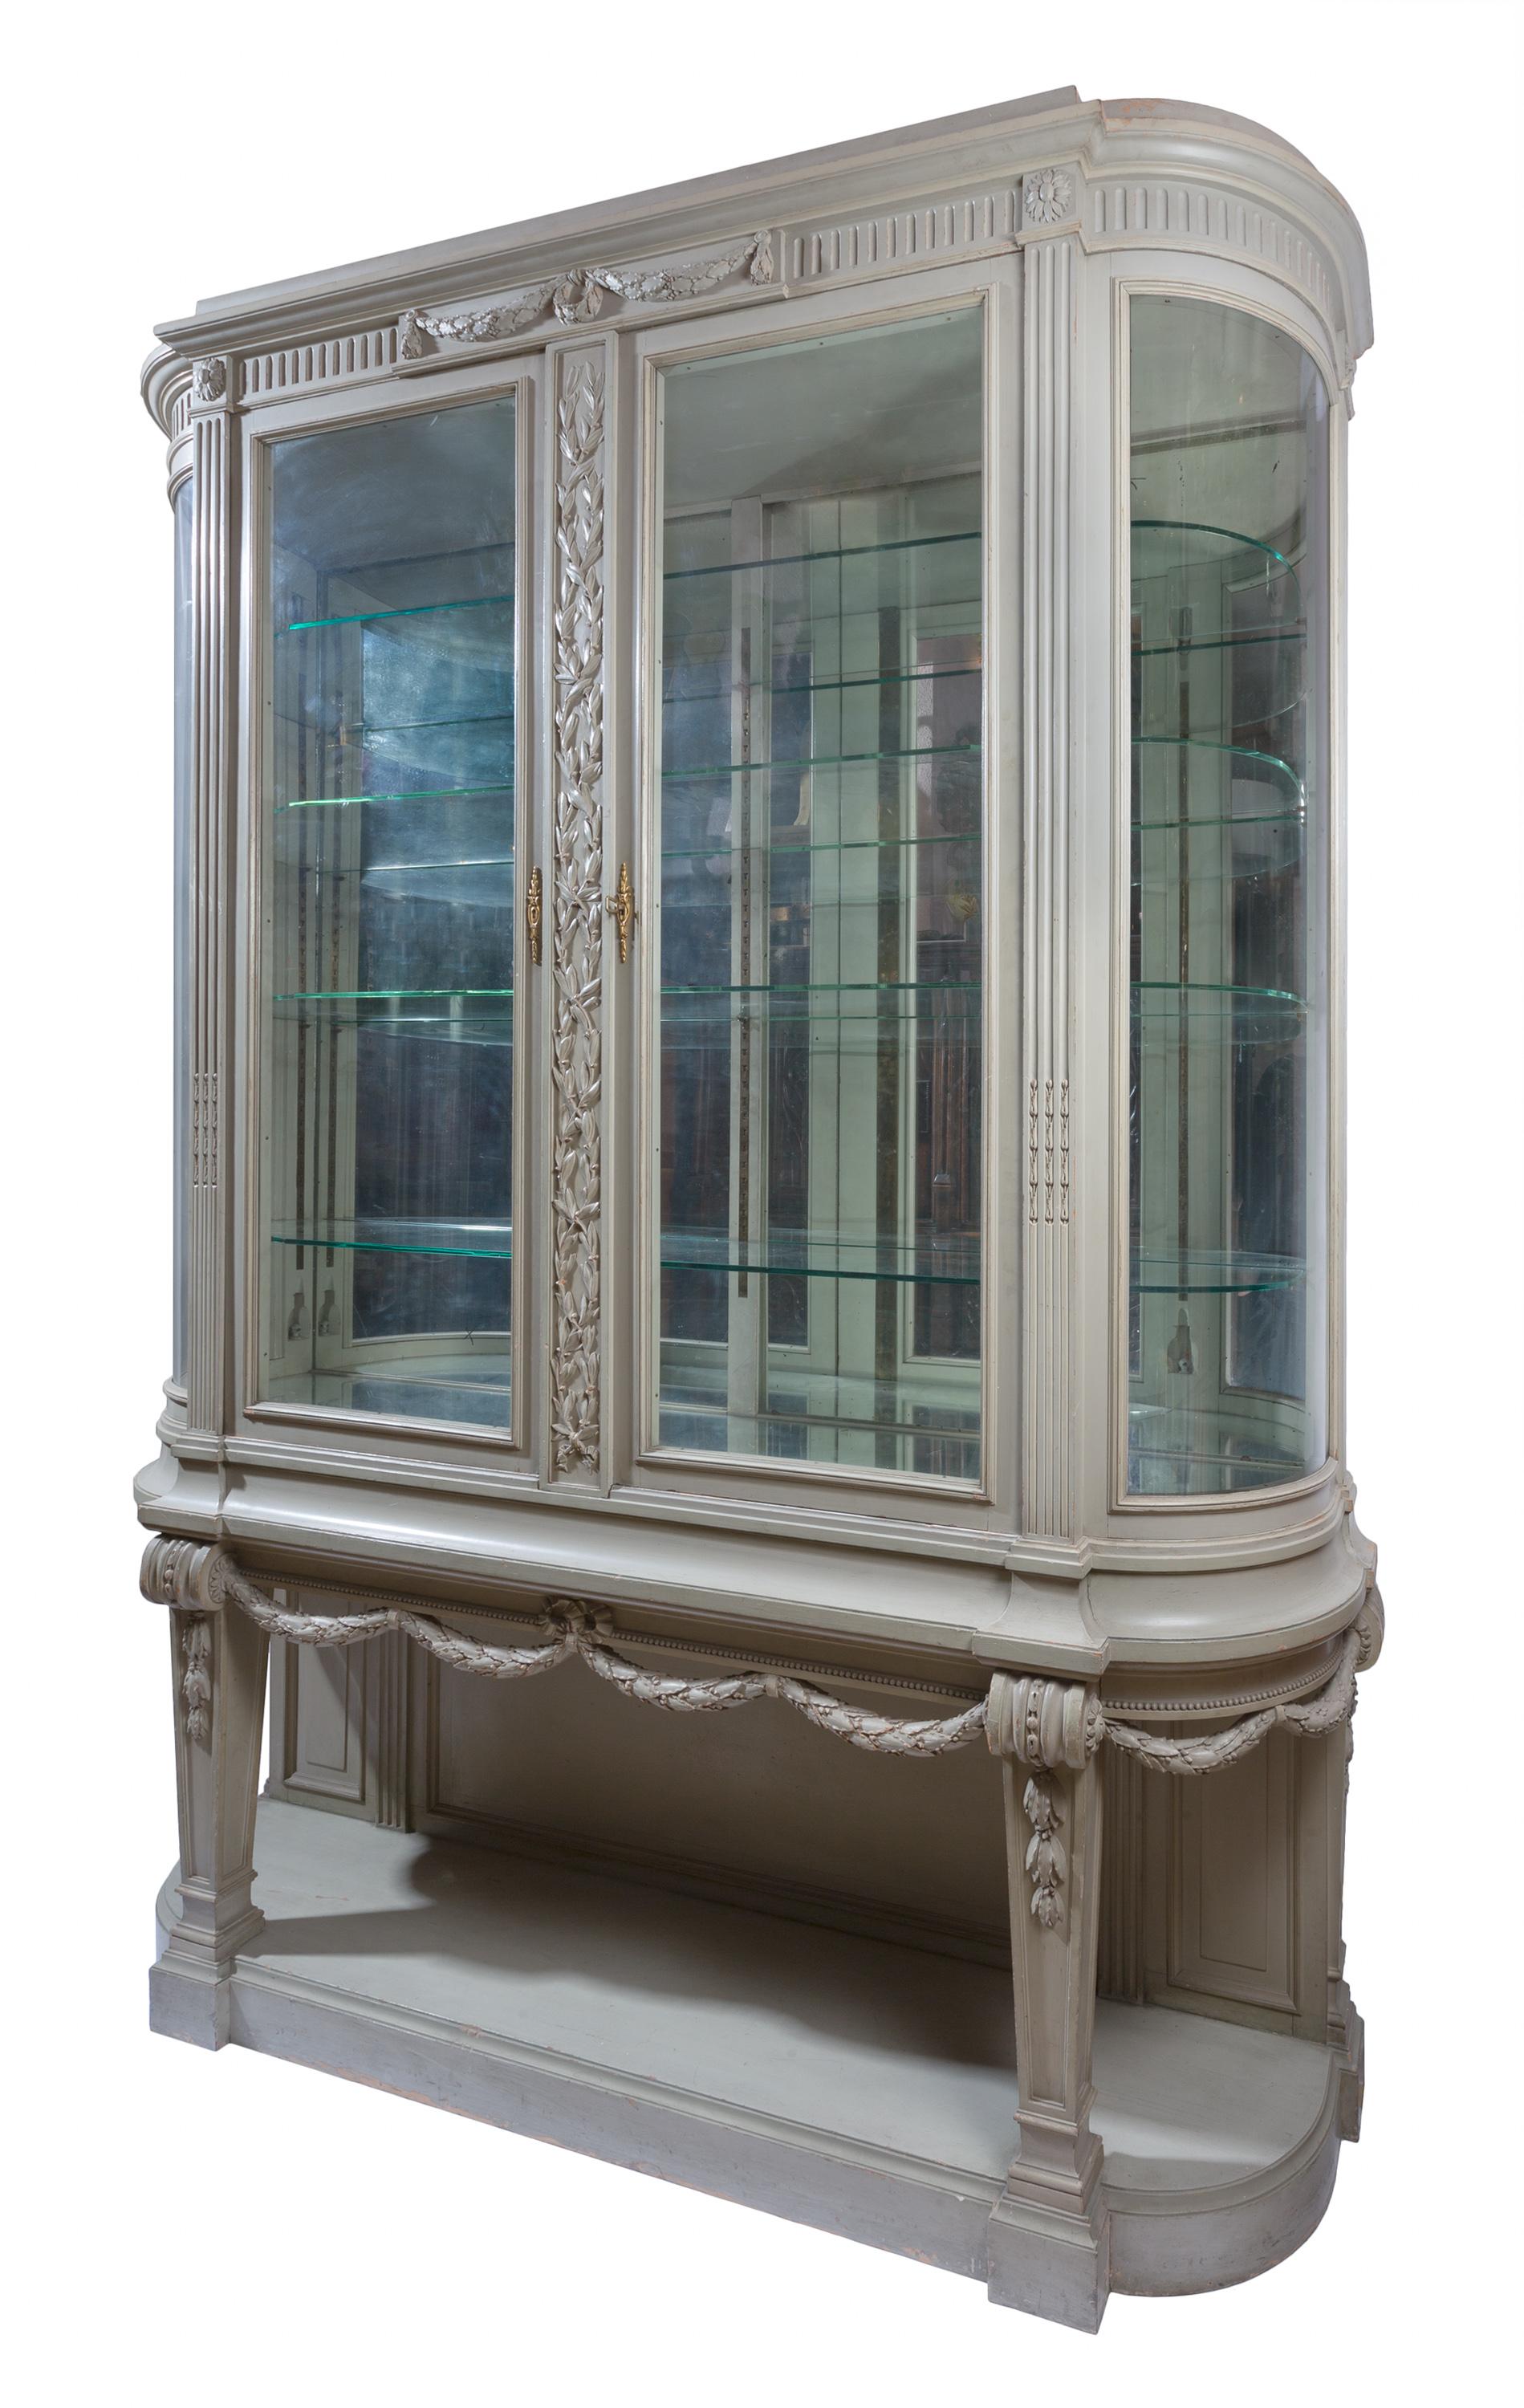 This rare 19th century Gris Trianon (Trianon Gray) Louis XVI style Vitrine / display cabinet / china cabinet by François Linke is constructed of oak and has its original (and unusual) painted grey-green finish. The vitrine was part of a larger group